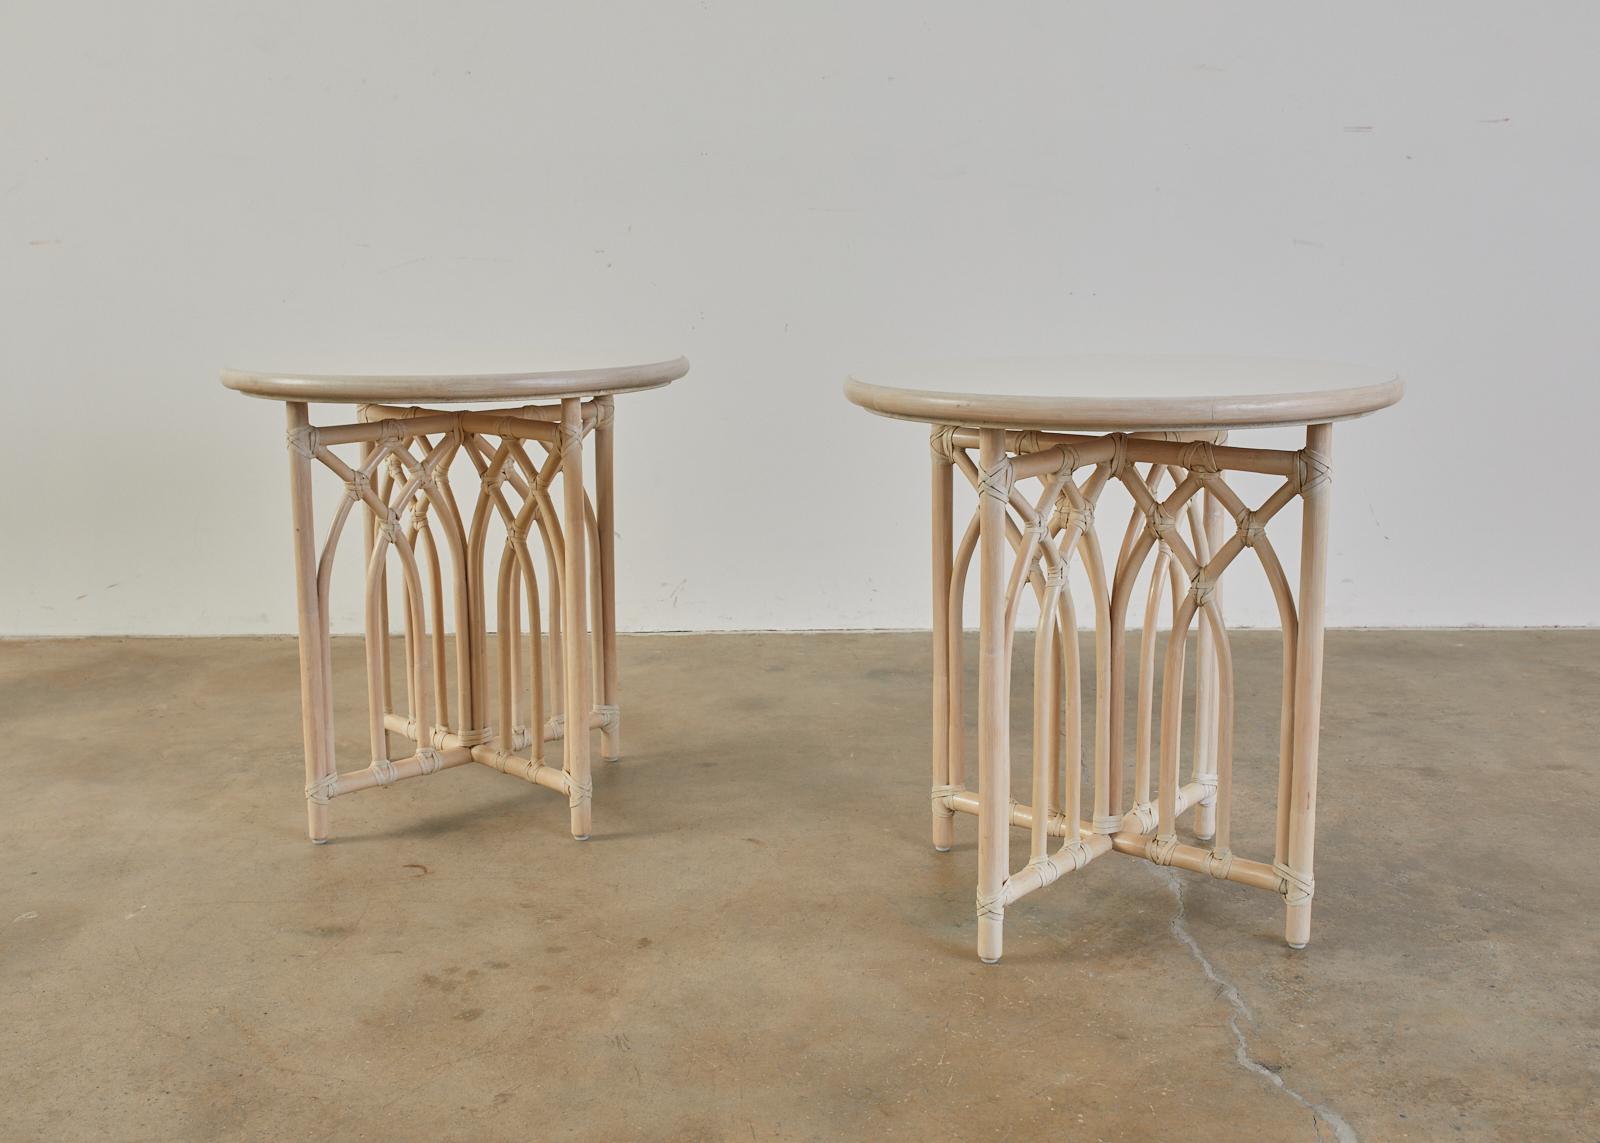 Fantastic matching pair of genuine McGuire drink's tables or side tables featuring a lacquered cerused finish. handcrafted from rattan decorated with arch-shaped motifs with leather rawhide laces on the exposed joints. The bases are topped with